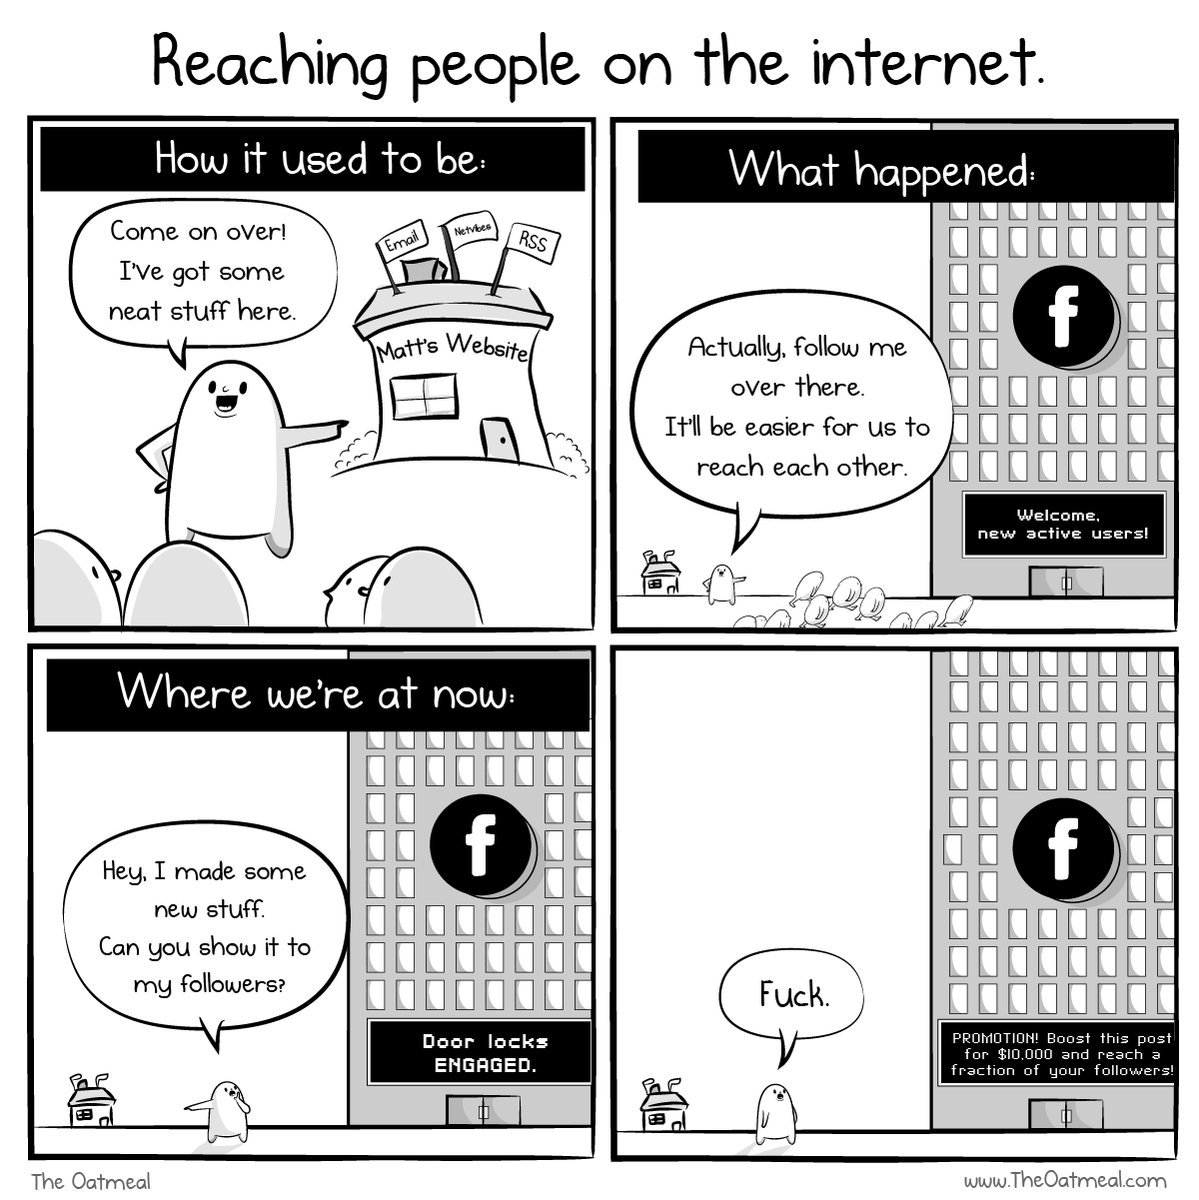 RT Reaching people on the internet.  - embedded image 